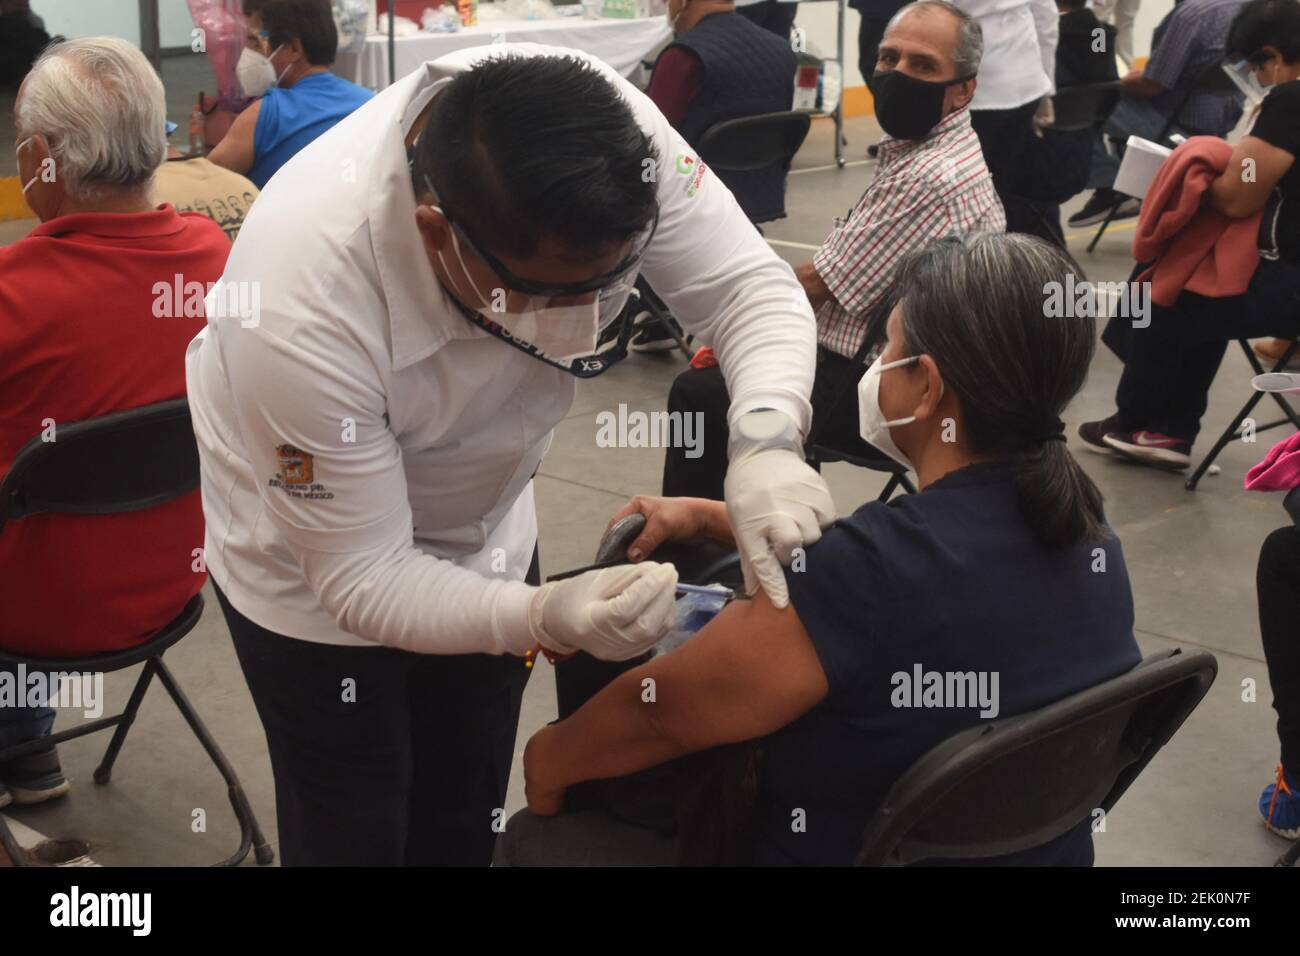 A Health worker administers Sinovac vaccine to a persons against coronavirus disease (COVID-19), during a mass vaccination to elderly persons at Las Americas Sport Center on February 22, 2021 in Ecatepec, State of Mexico, Mexico. Photo by Jose M. Ruiz/Eyepix/ABACAPRESS.COM Stock Photo